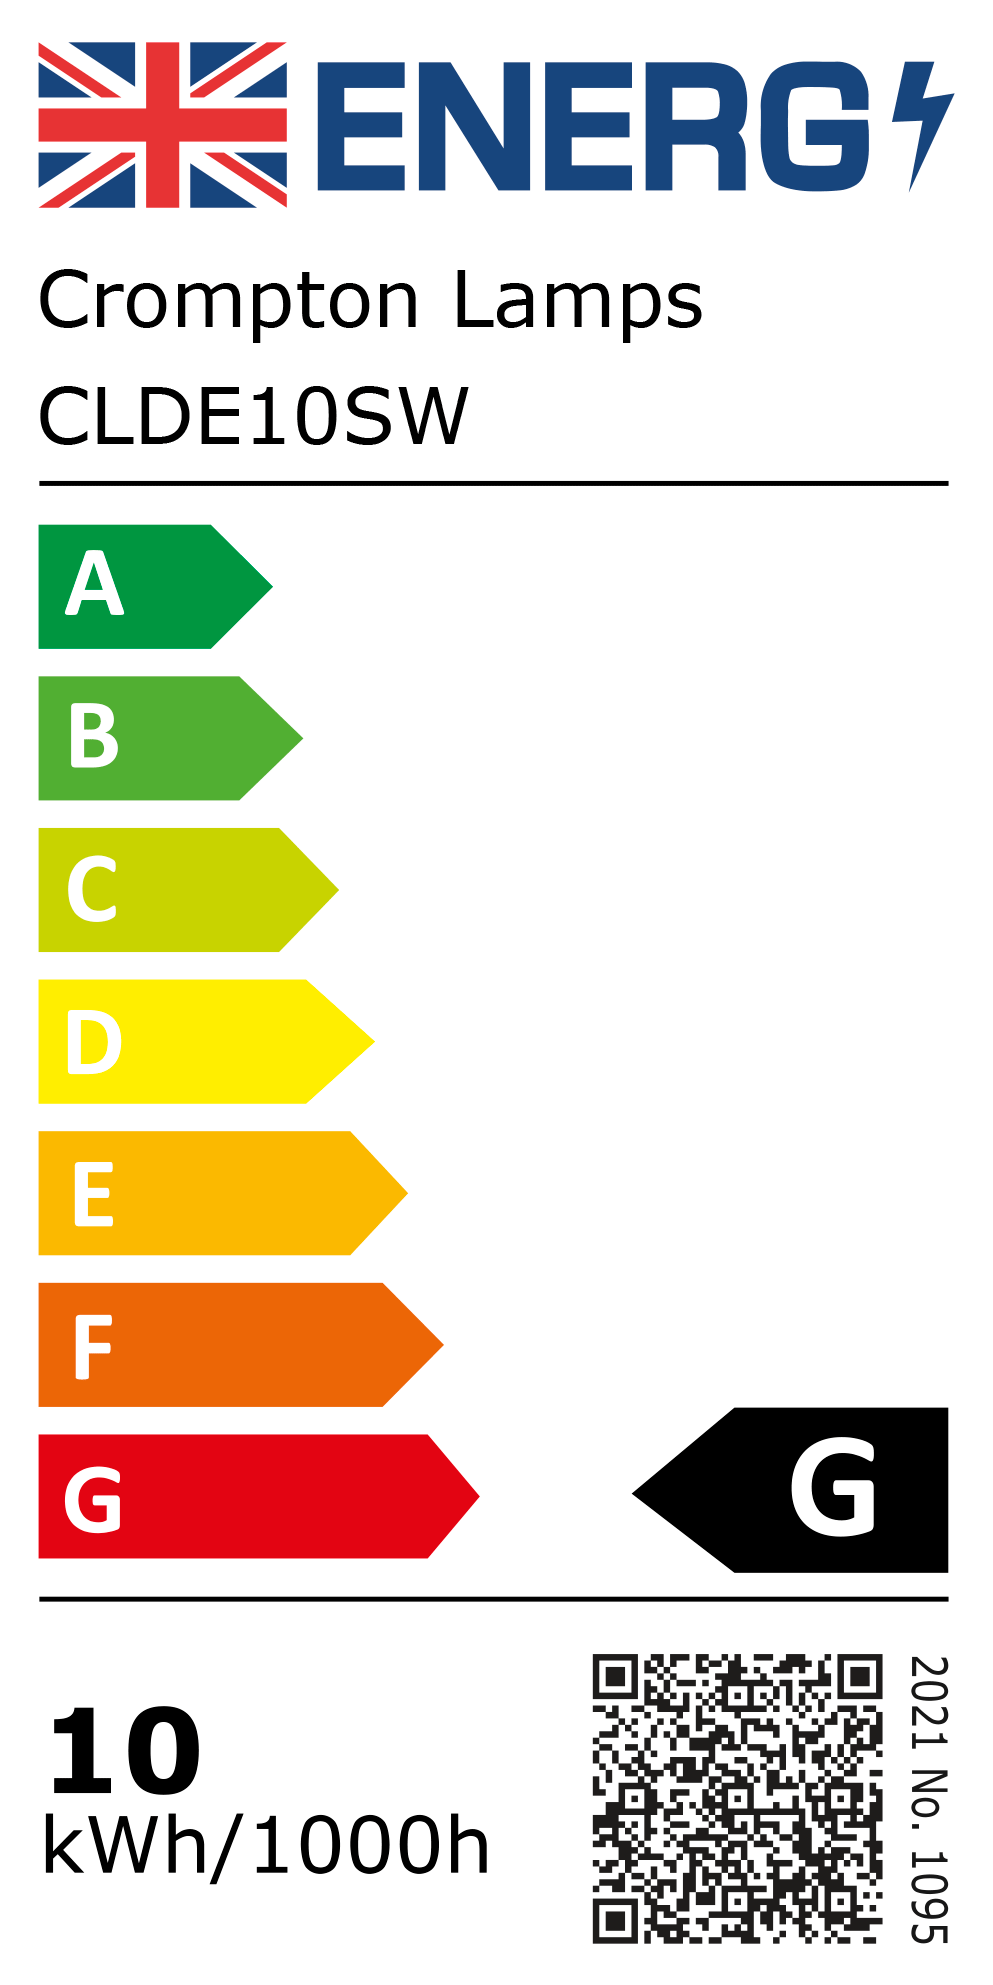 New 2021 Energy Rating Label: Stock Code CLDE10SW